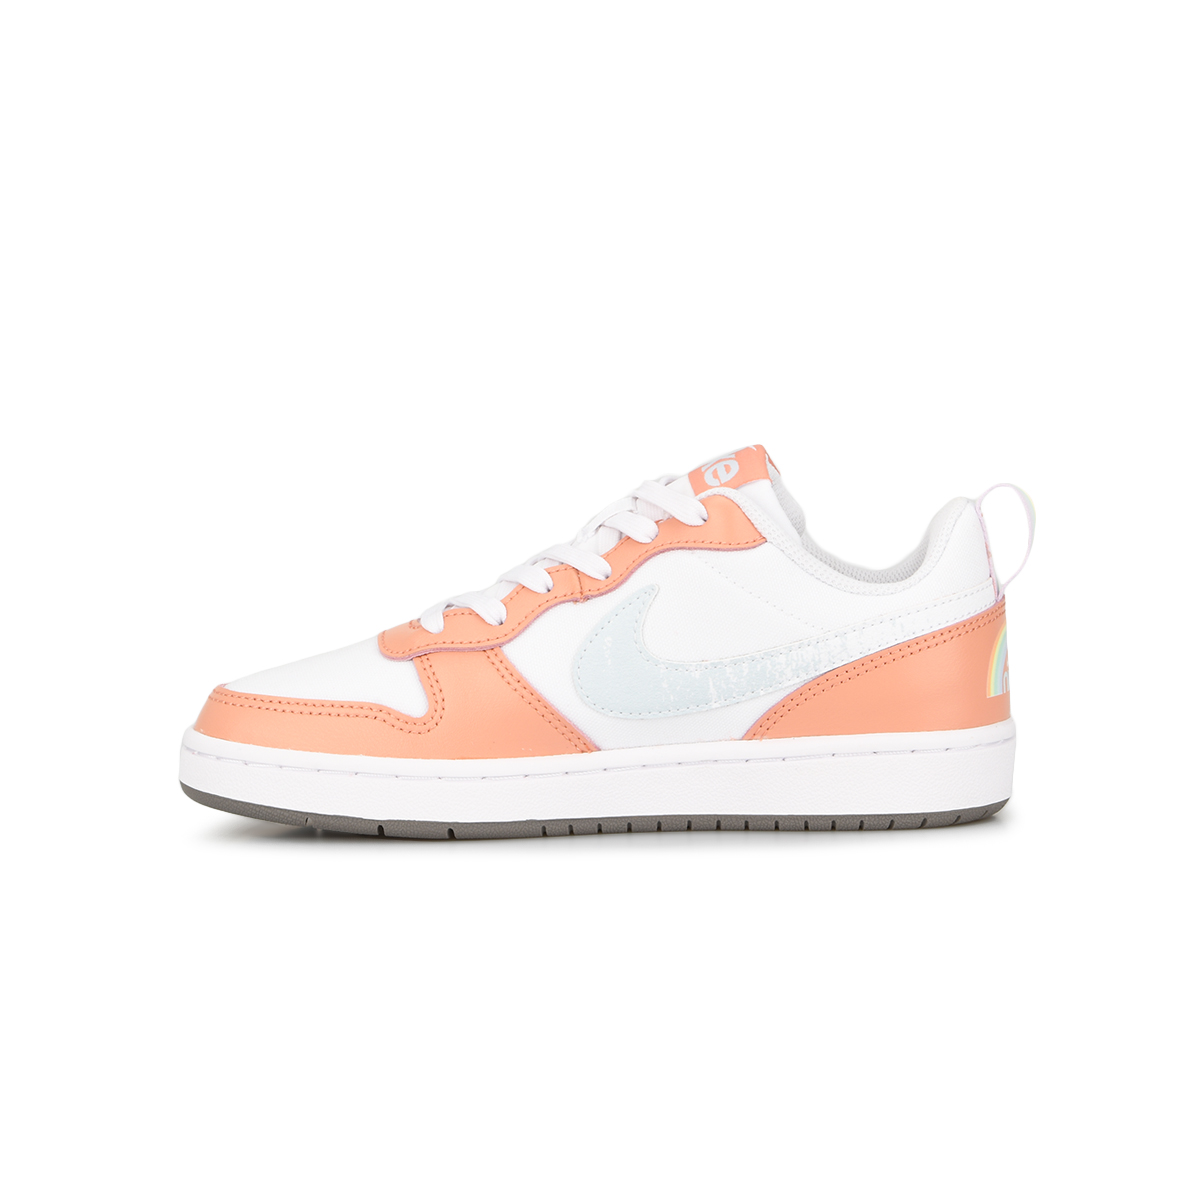 Zapatillas Nike Court Borough Low 2 Se,  image number null